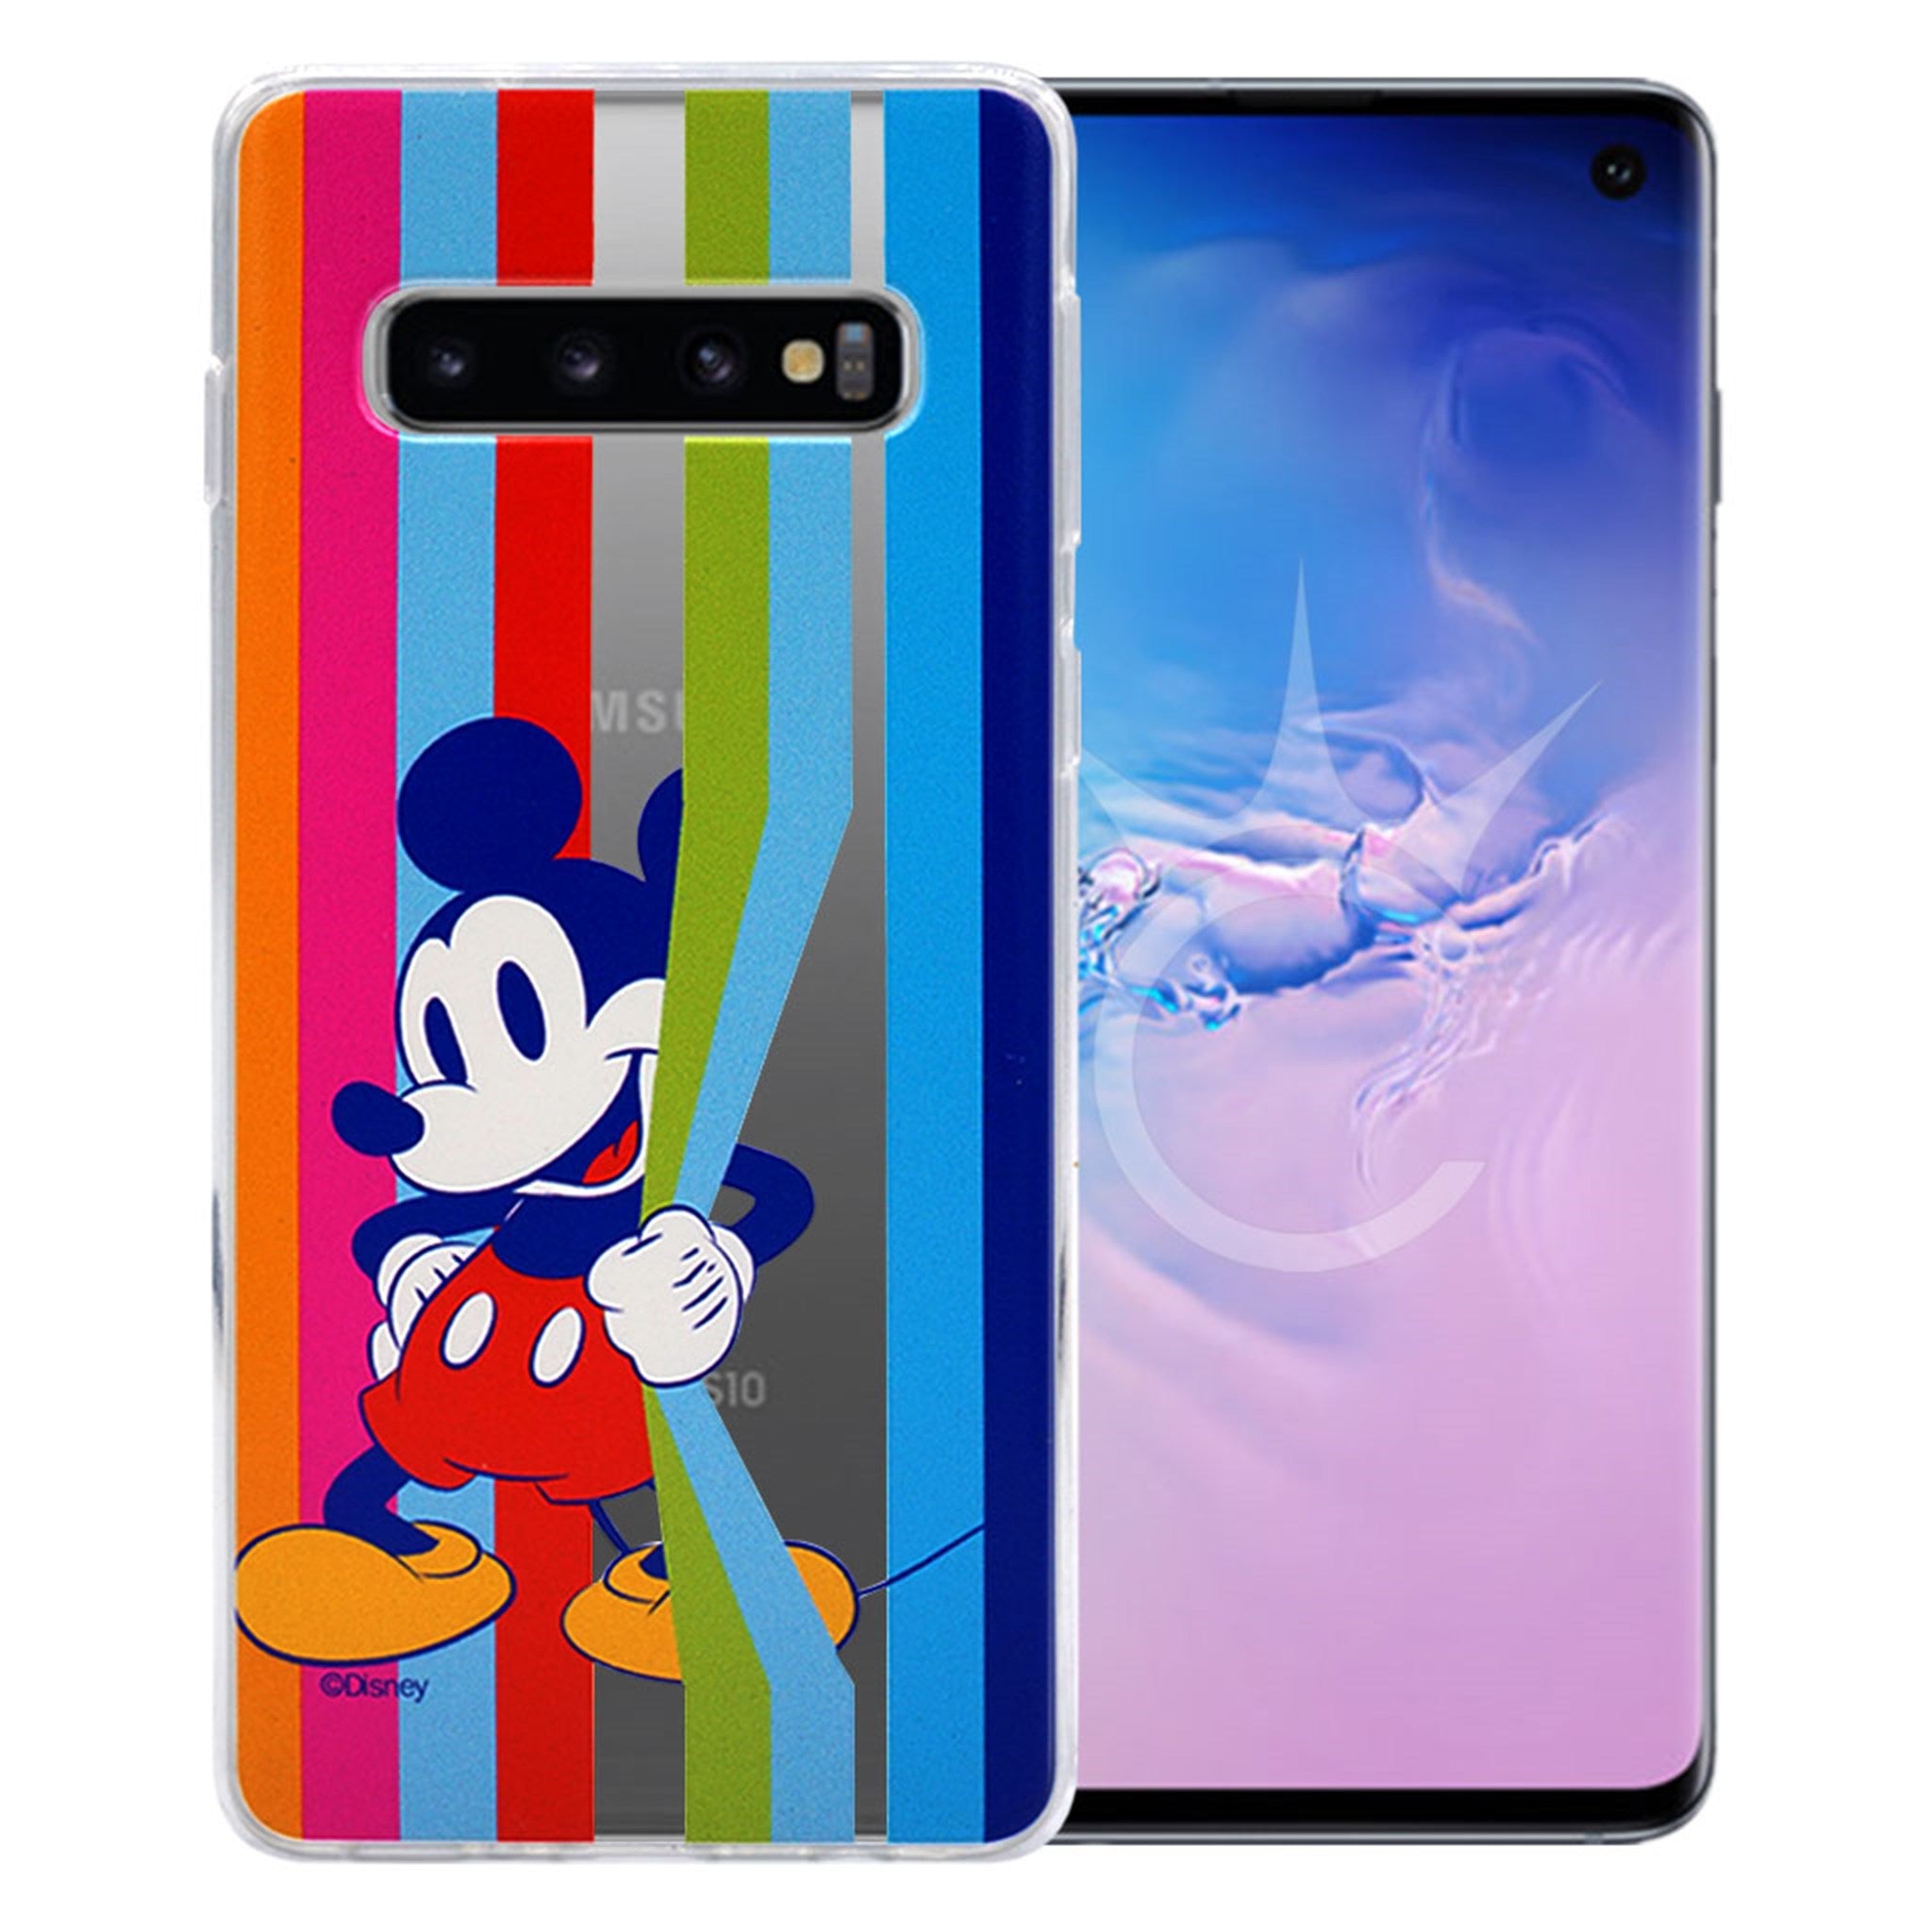 Mickey Mouse #26 Disney cover for Samsung Galaxy S10 - Transparent